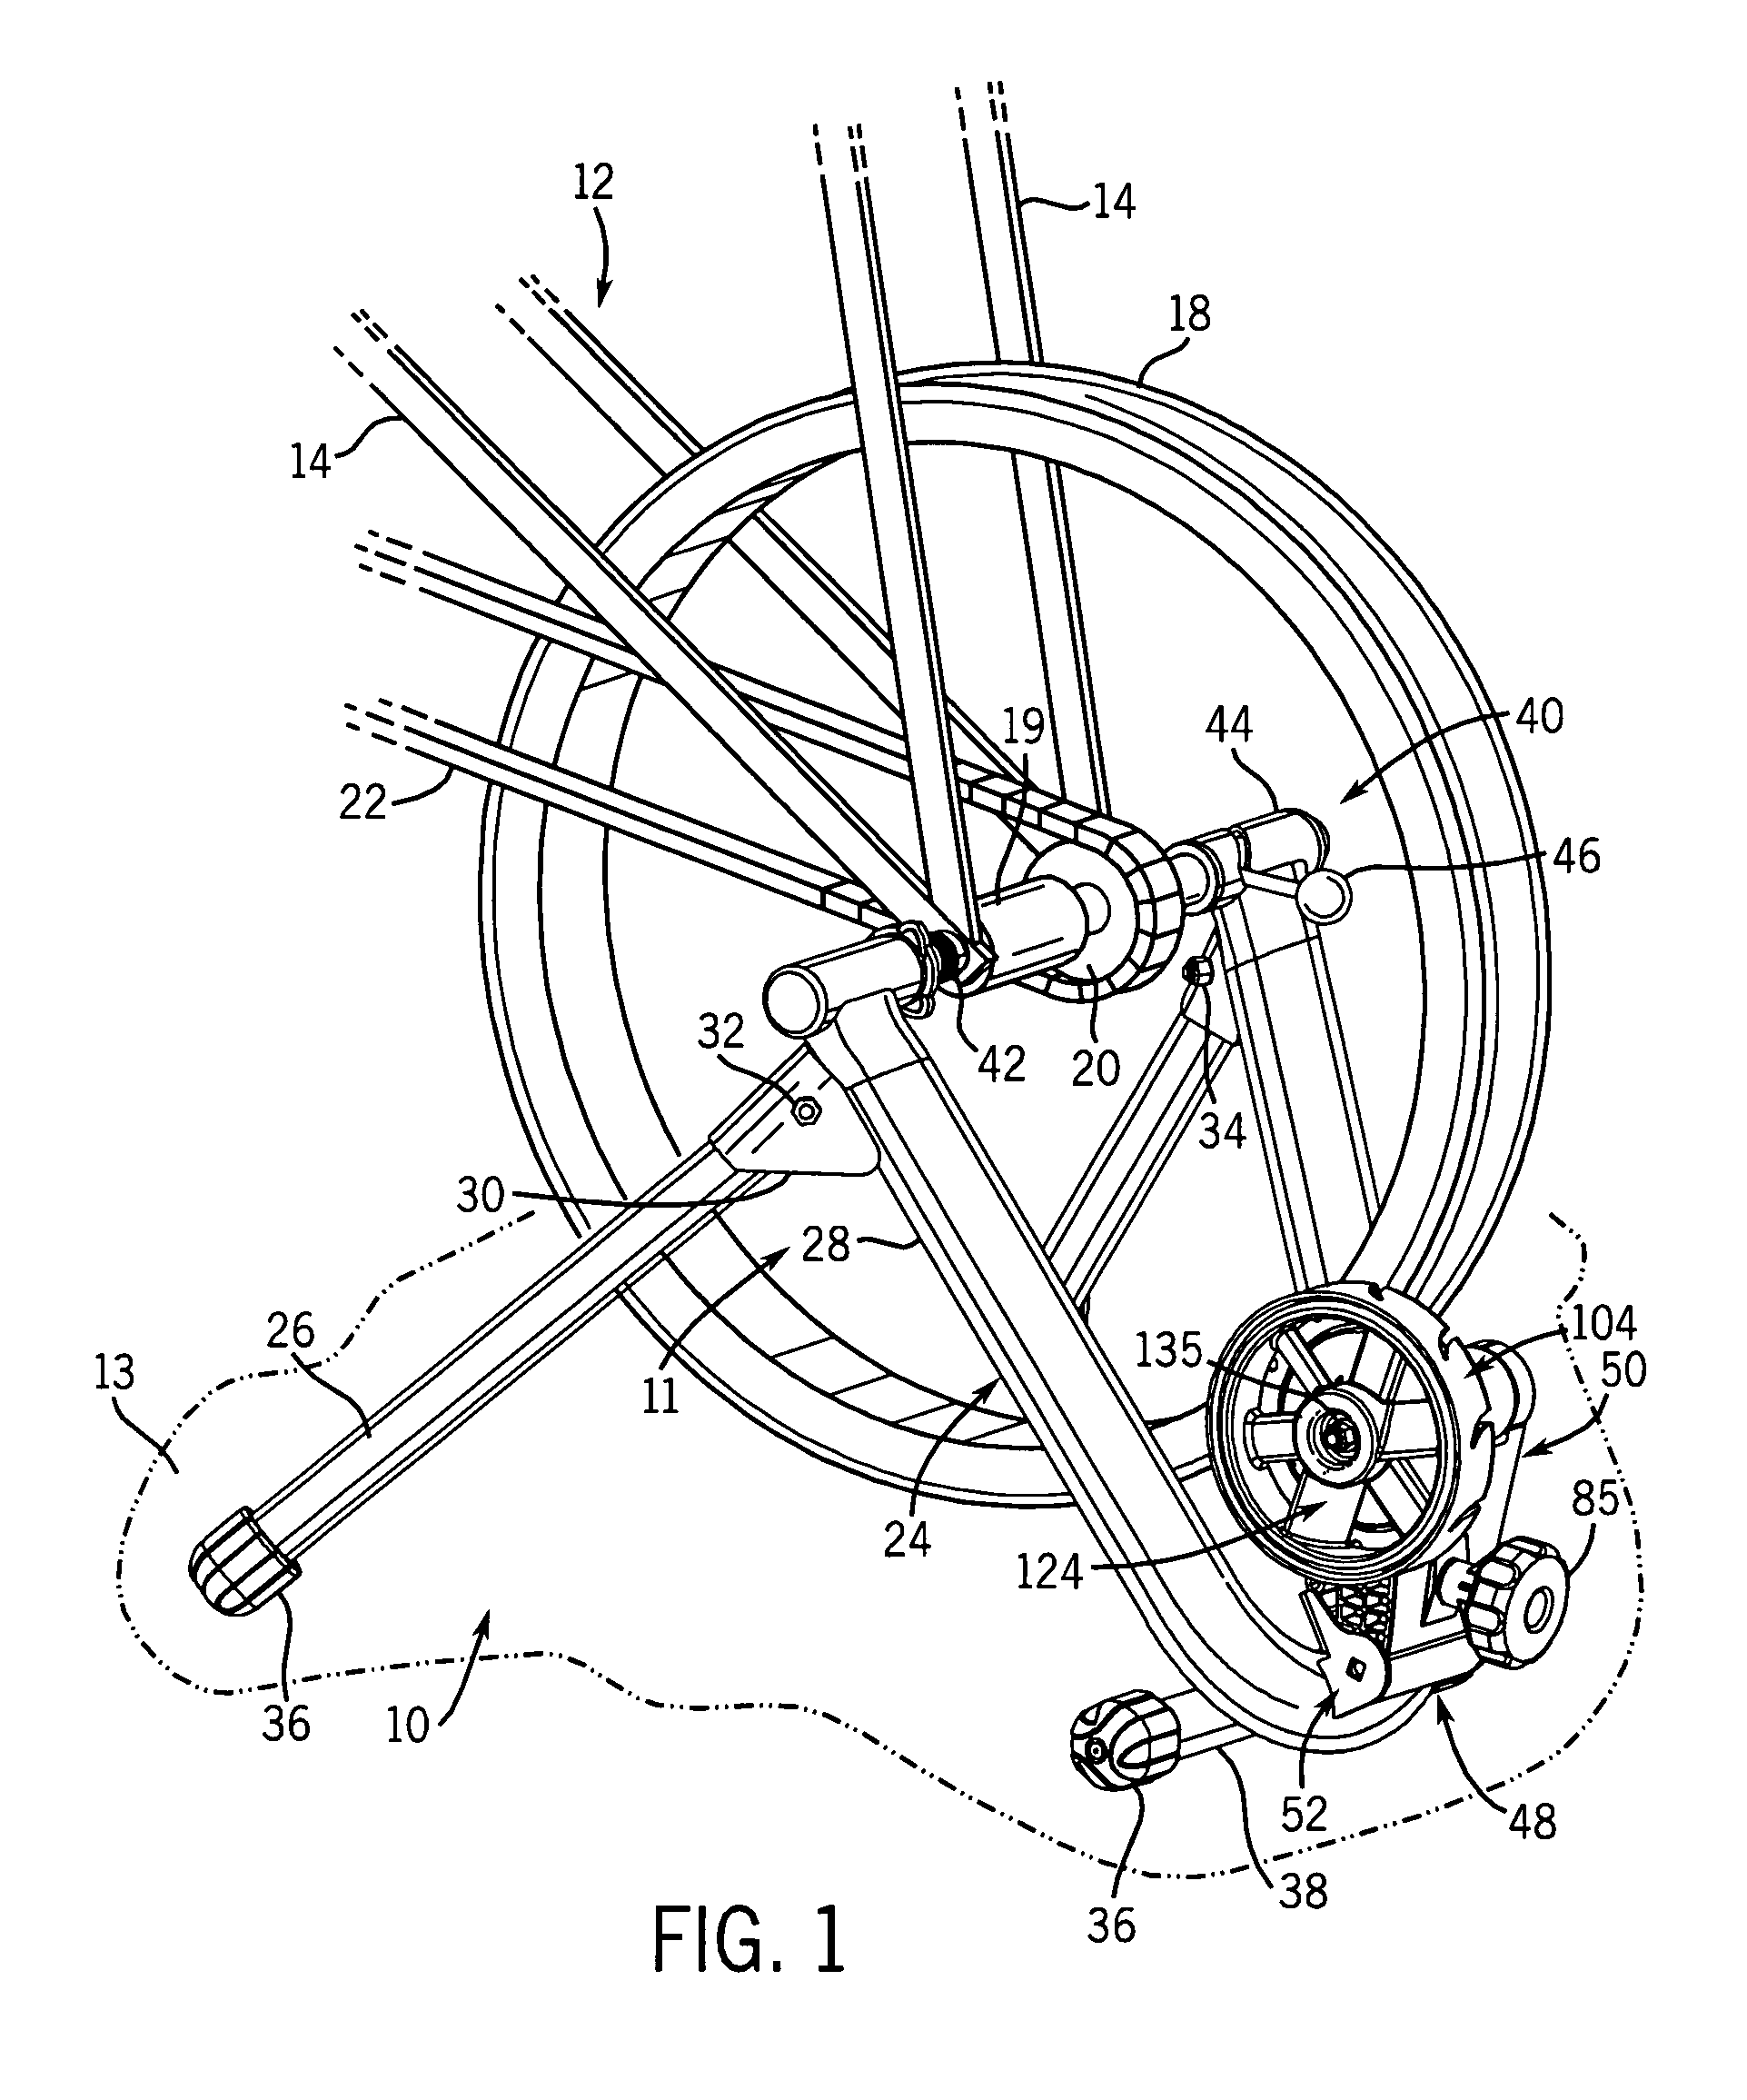 Variable magnetic resistance unit for an exercise device